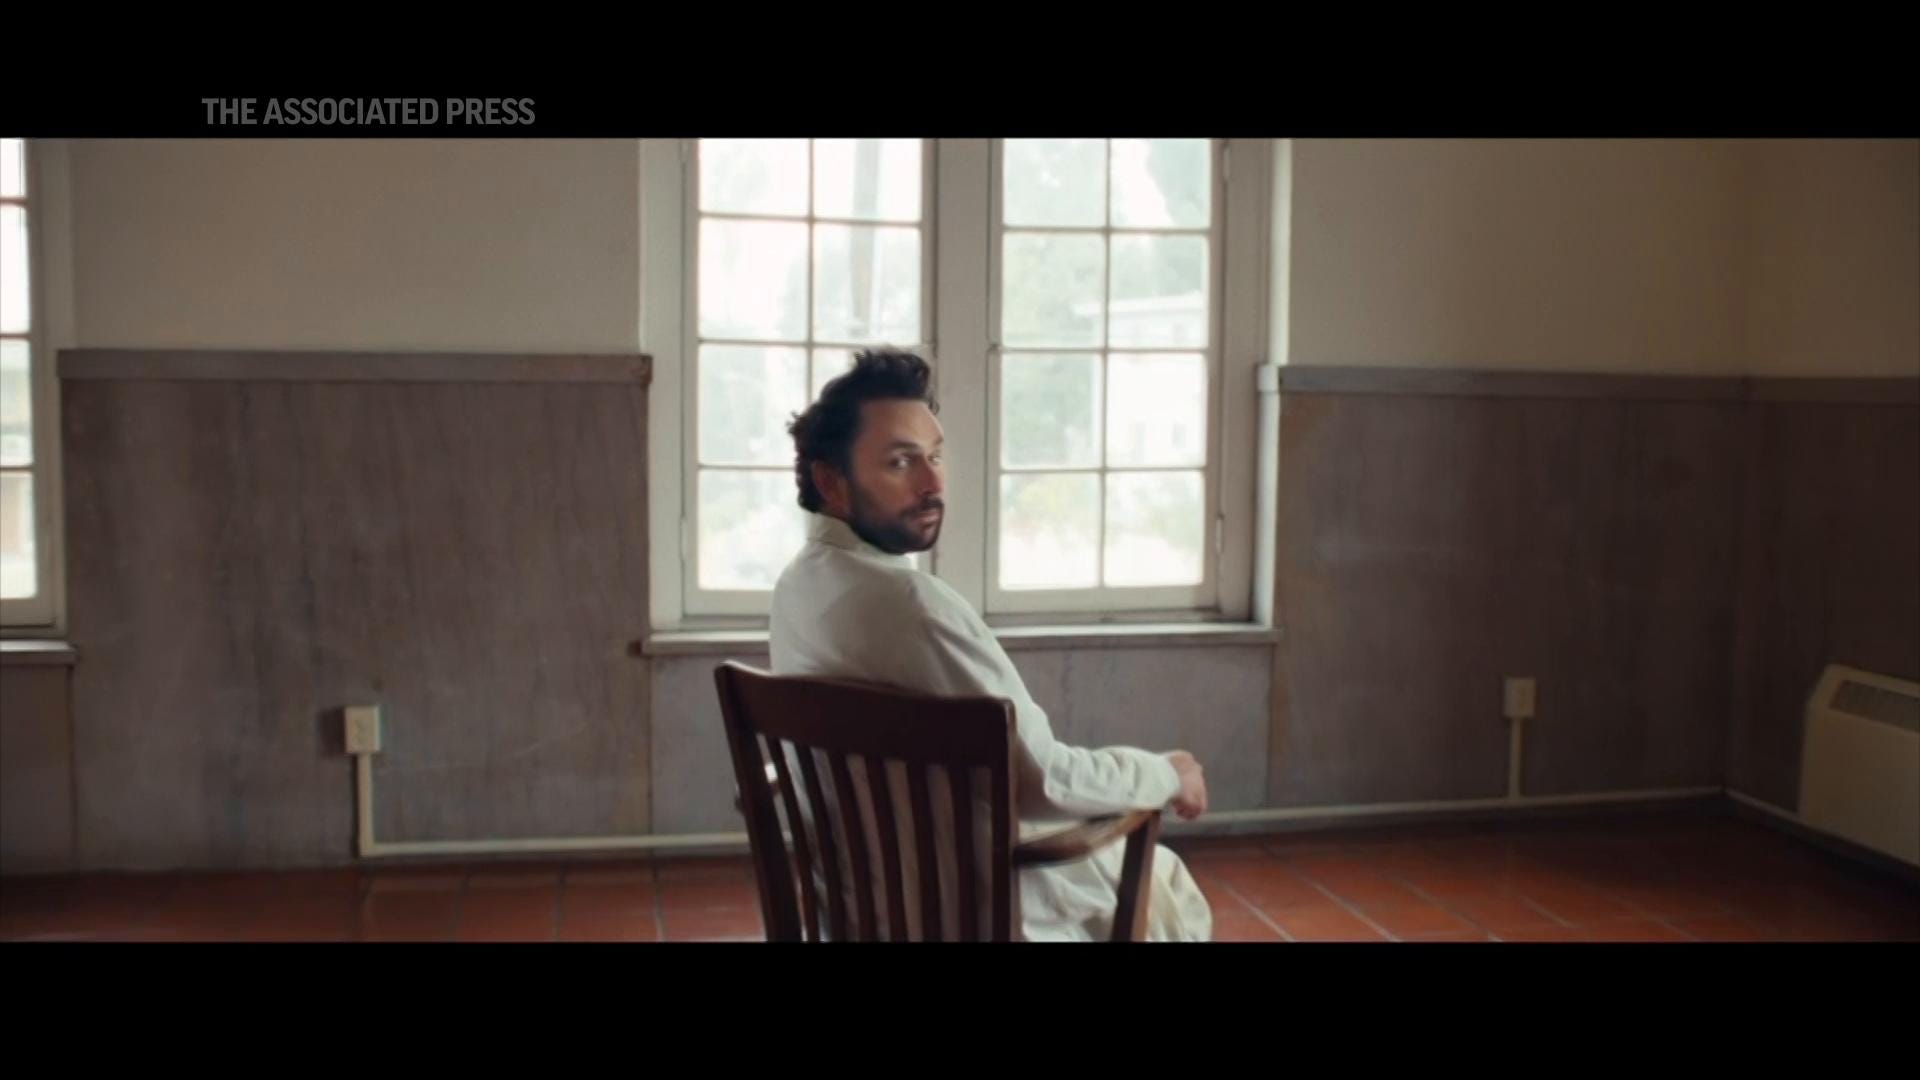 Charlie Day Opens Up About Working With Ray Liotta In 'Fool's